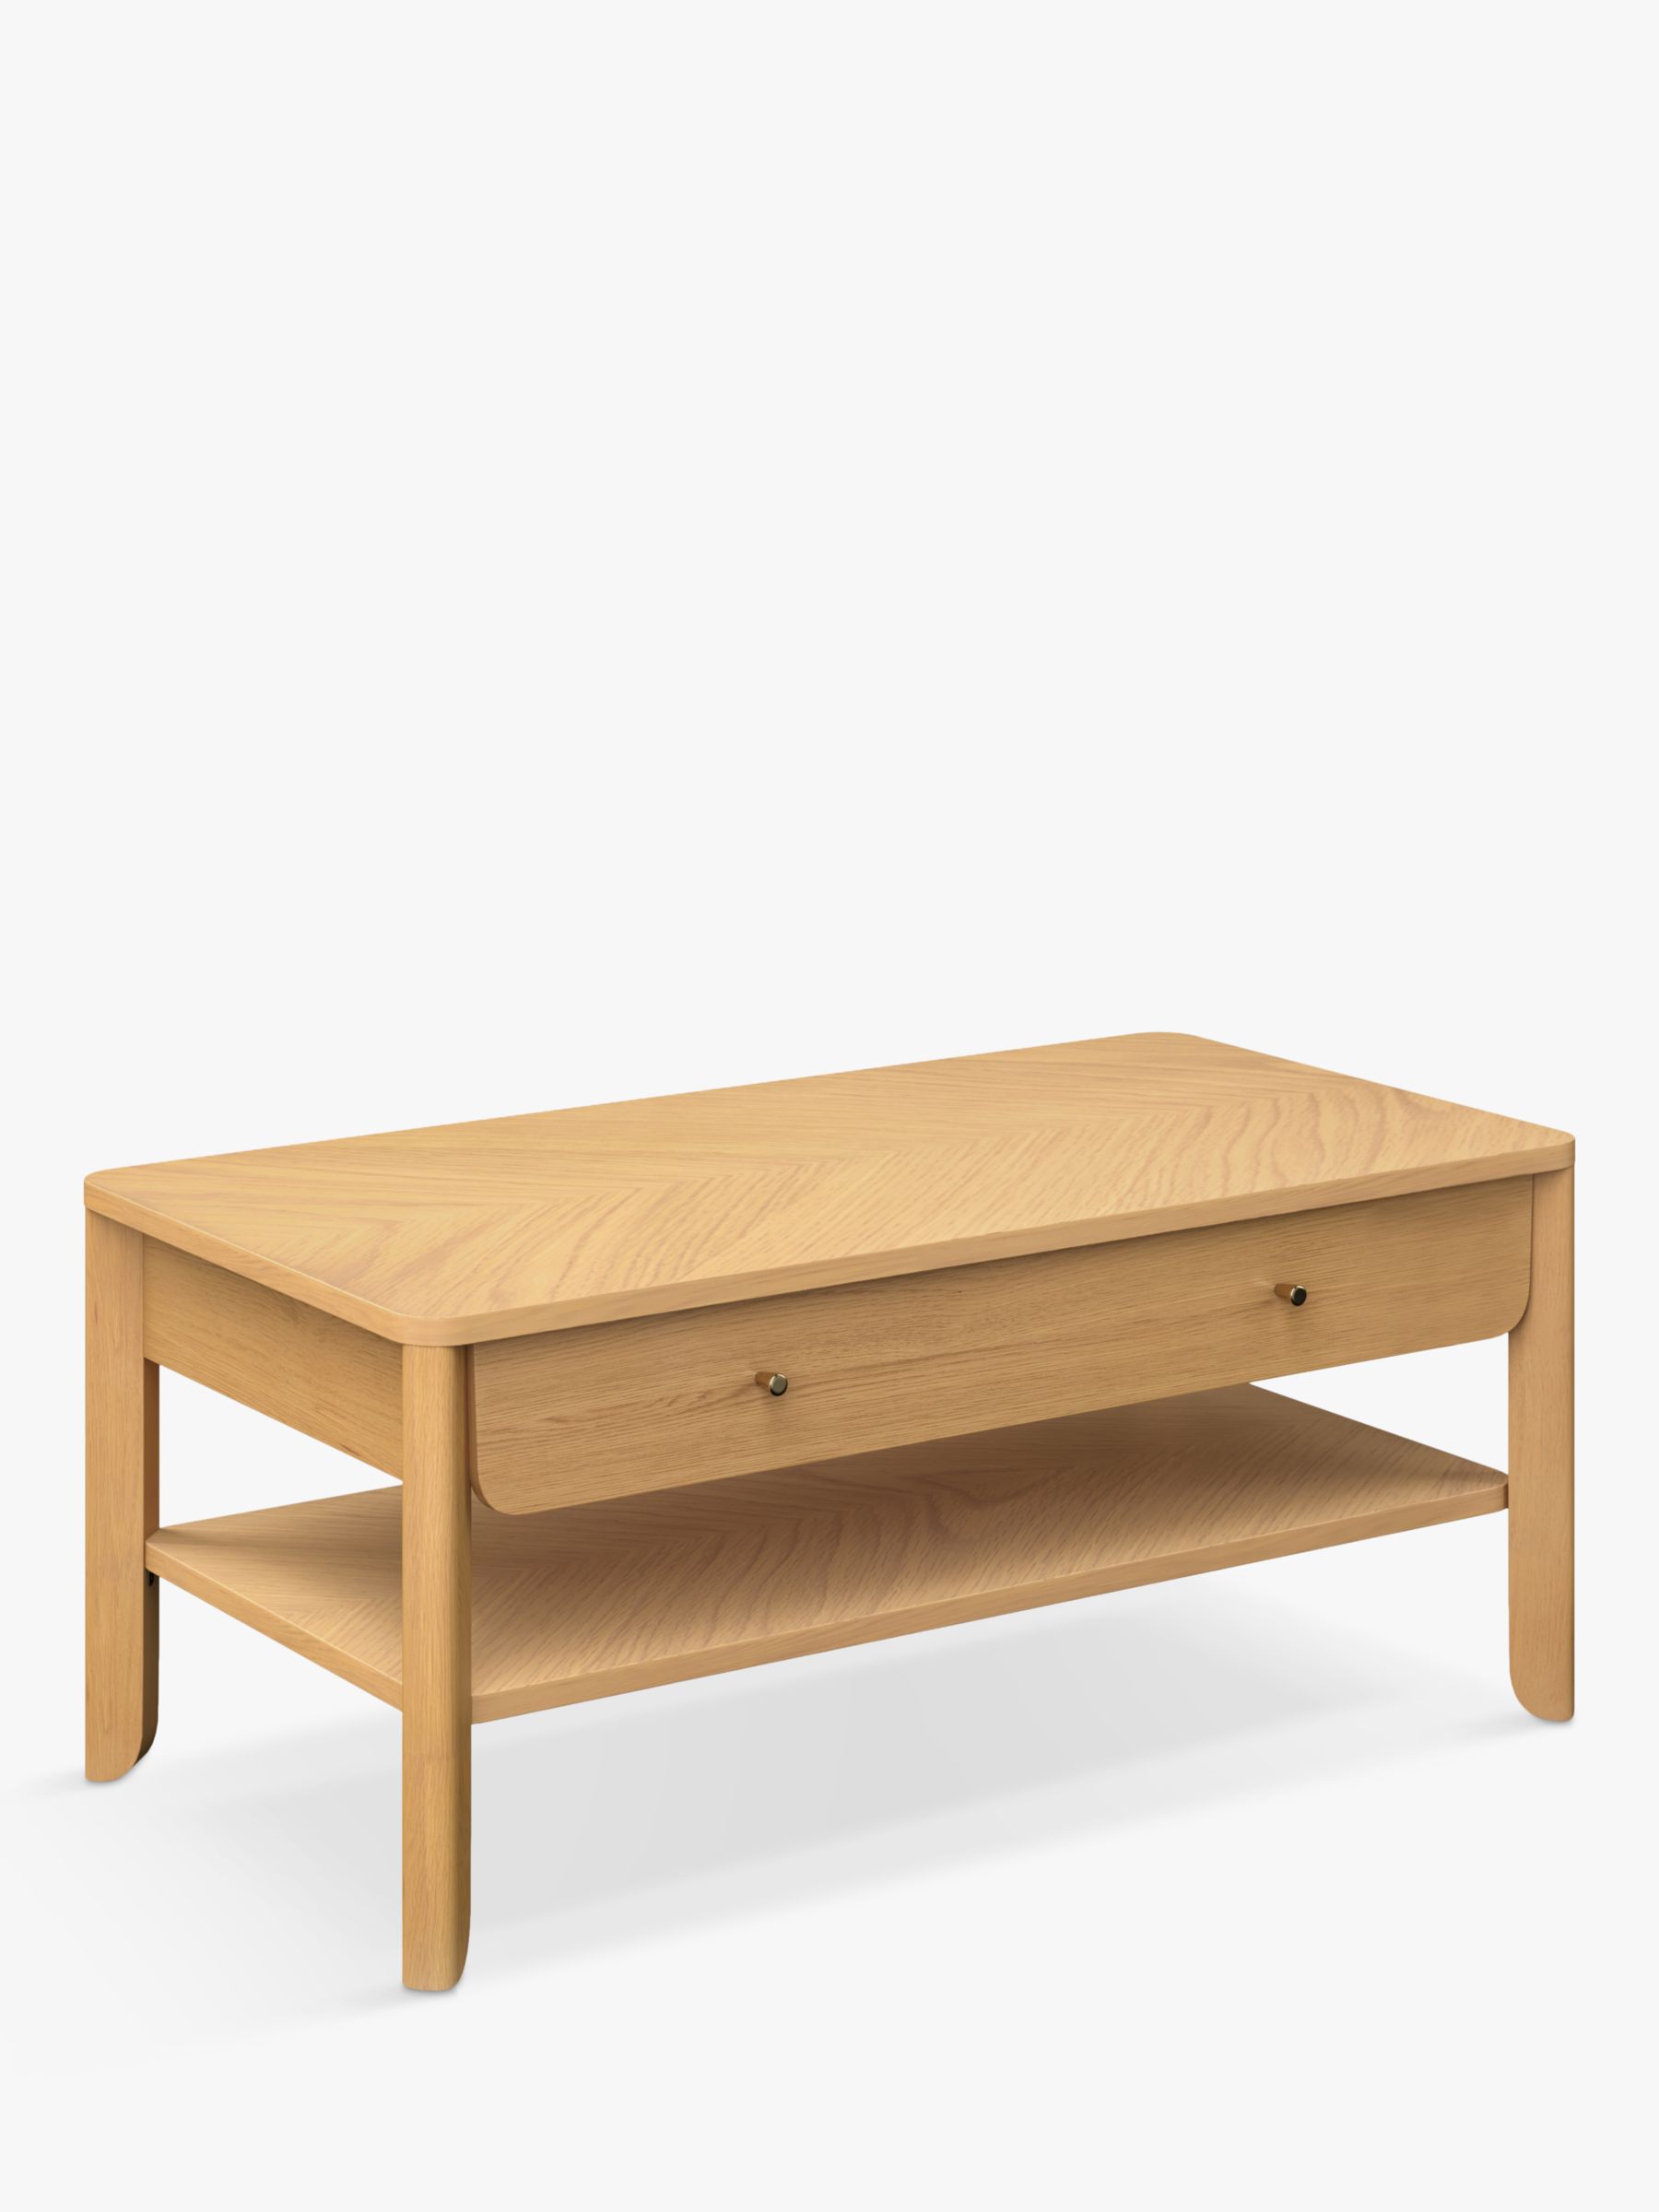 Photo of John lewis anyday fern coffee table